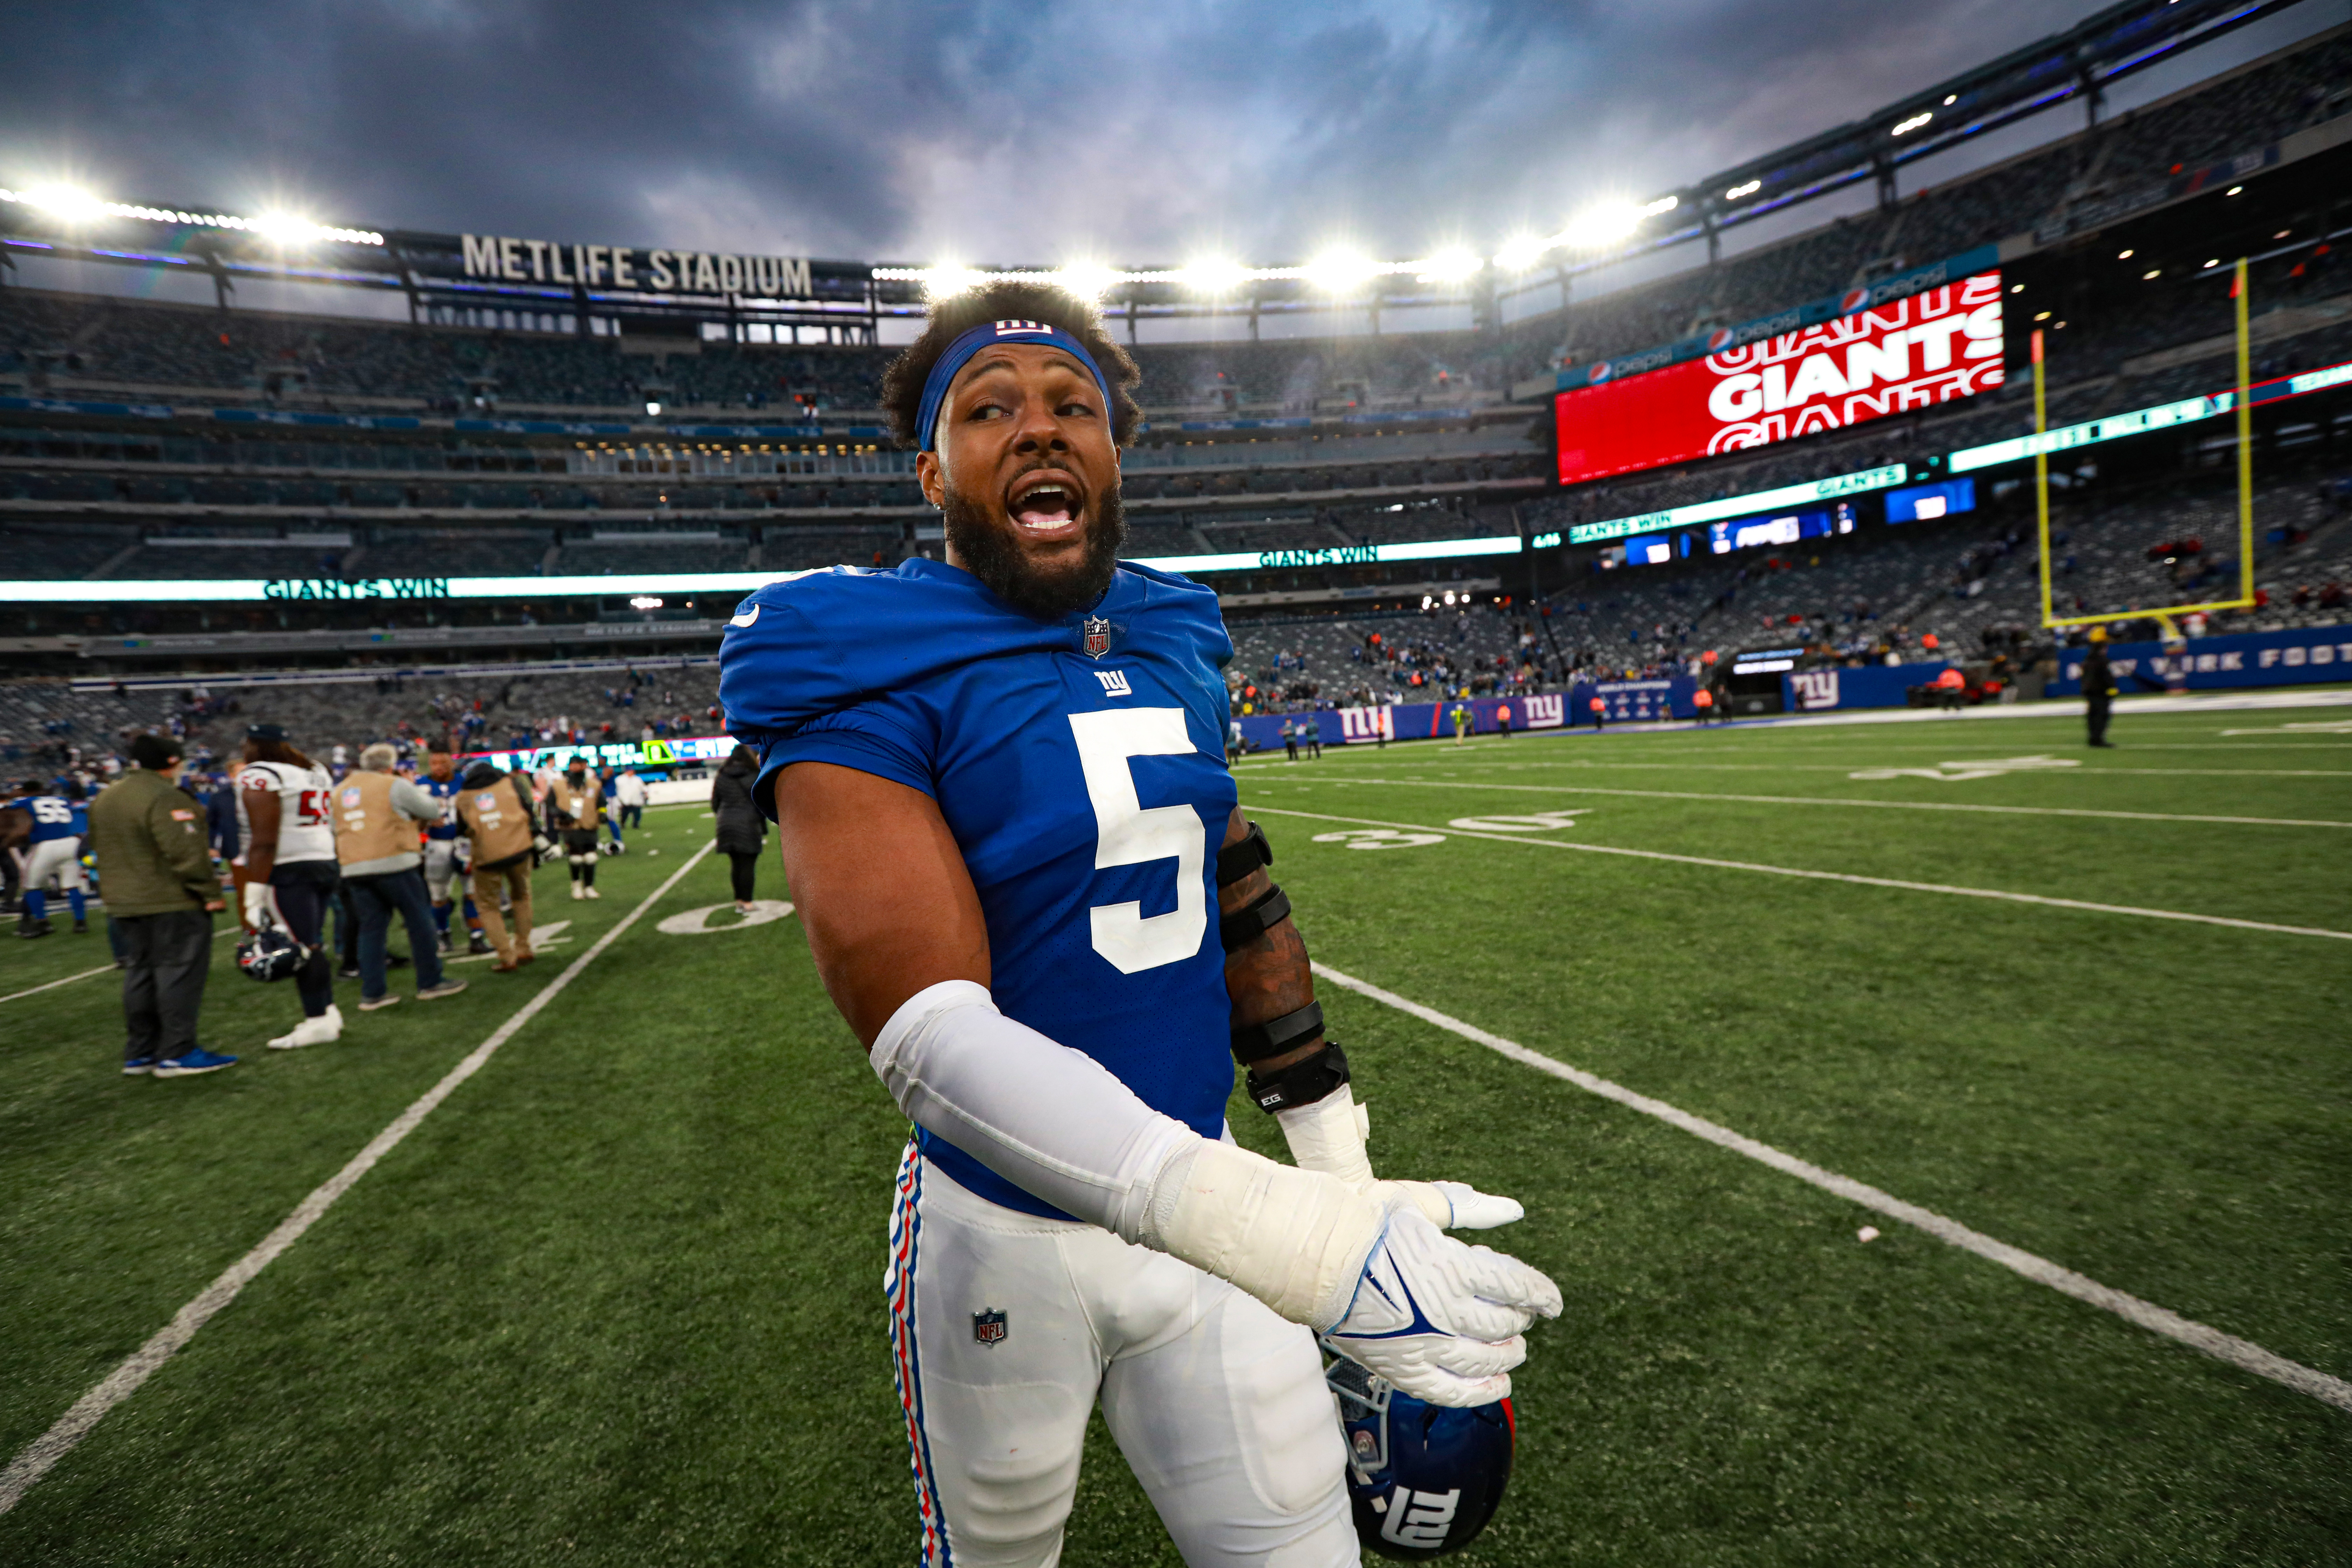 Former Oregon Ducks' star Kayvon Thibodeaux says he was praying, not  pouting during N.Y. Giants' historic comeback win 